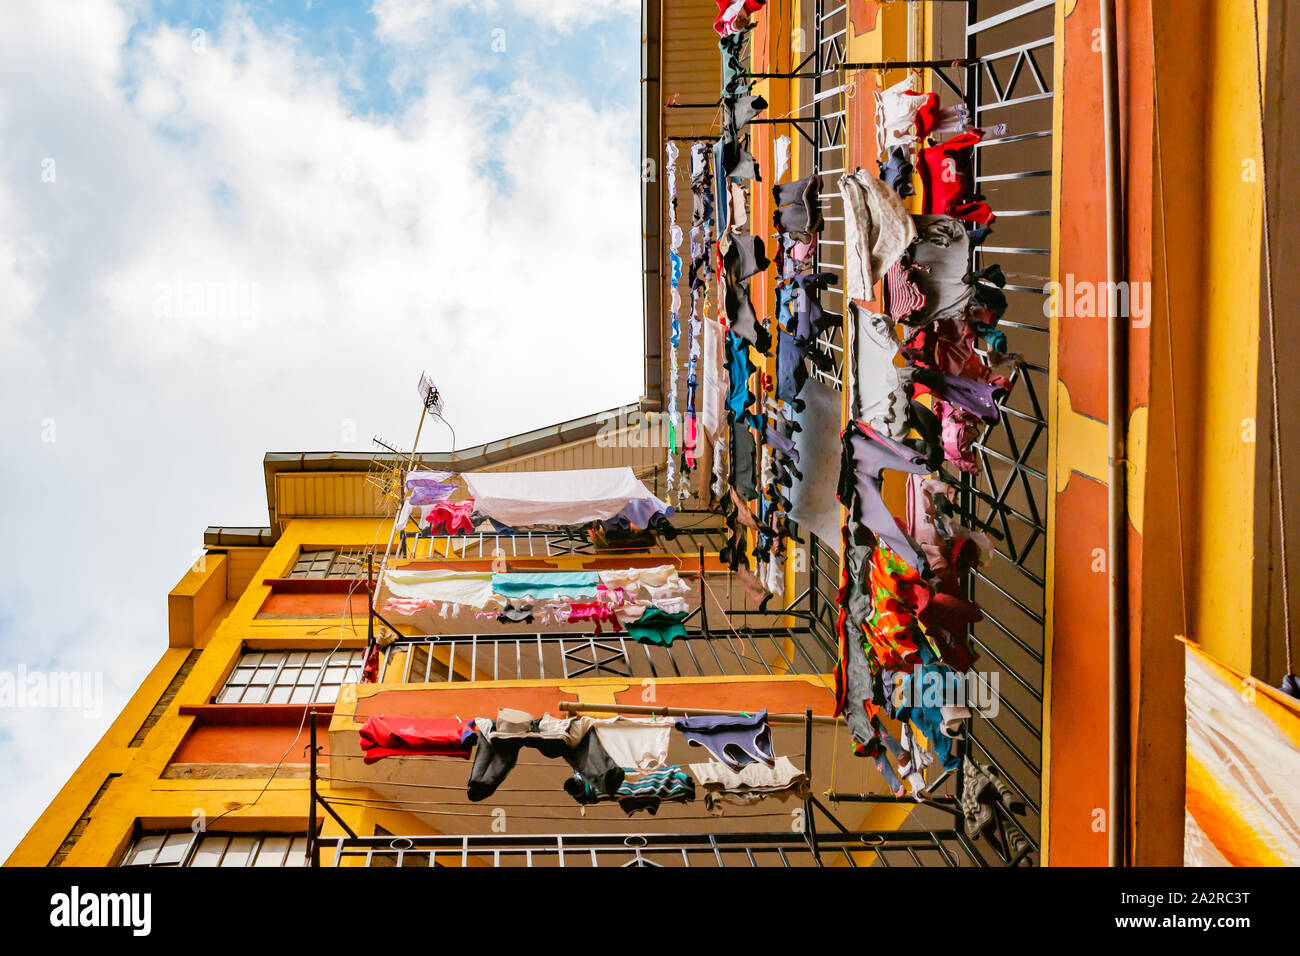 Nairobi, Kenya – June 20th, 2019: Colour photograph looking directly up inside a residential tower block with colourful laundry hanging from balconies Stock Photo